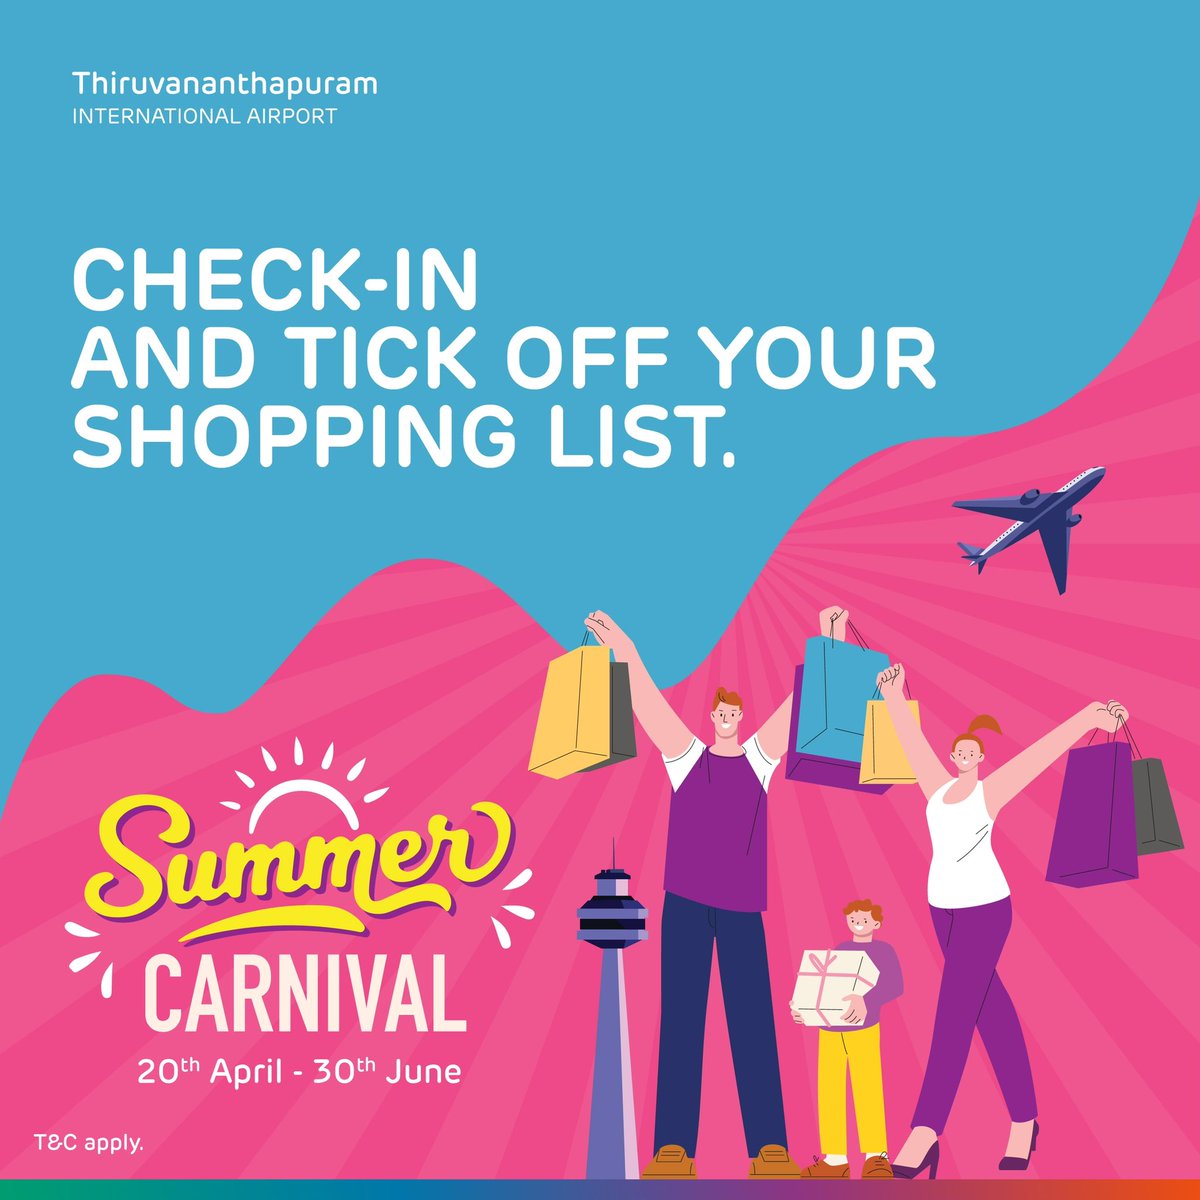 Fly into a world of exciting deals and discounts at our Summer Carnival. So, pack light and shop heavy!

#ThiruvananthapuramAirport #GatewayToGoodness #SummerCarnival #Offers #Explore #Airport